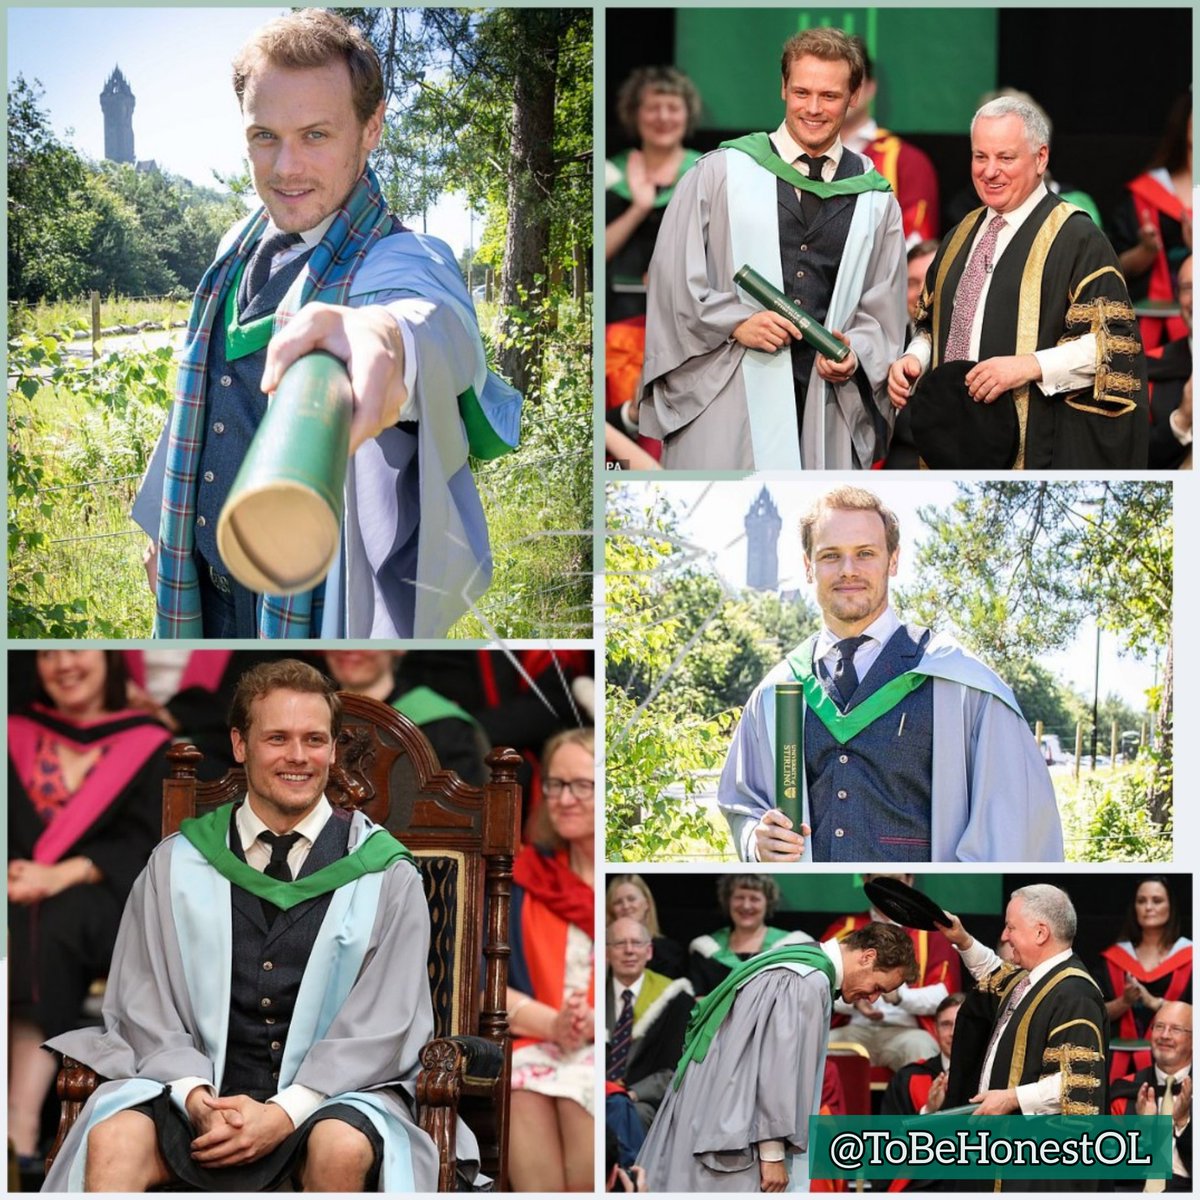 Two years ago today @SamHeughan received an honorary degree from the University of Stirling for his outstanding contribution to acting and charitable endeavours.
A proud and well-deserved moment 💪🏻
#SamHeughan #UniversityOfStirling #MyPeakChallenge #Outlander #MenInKilts